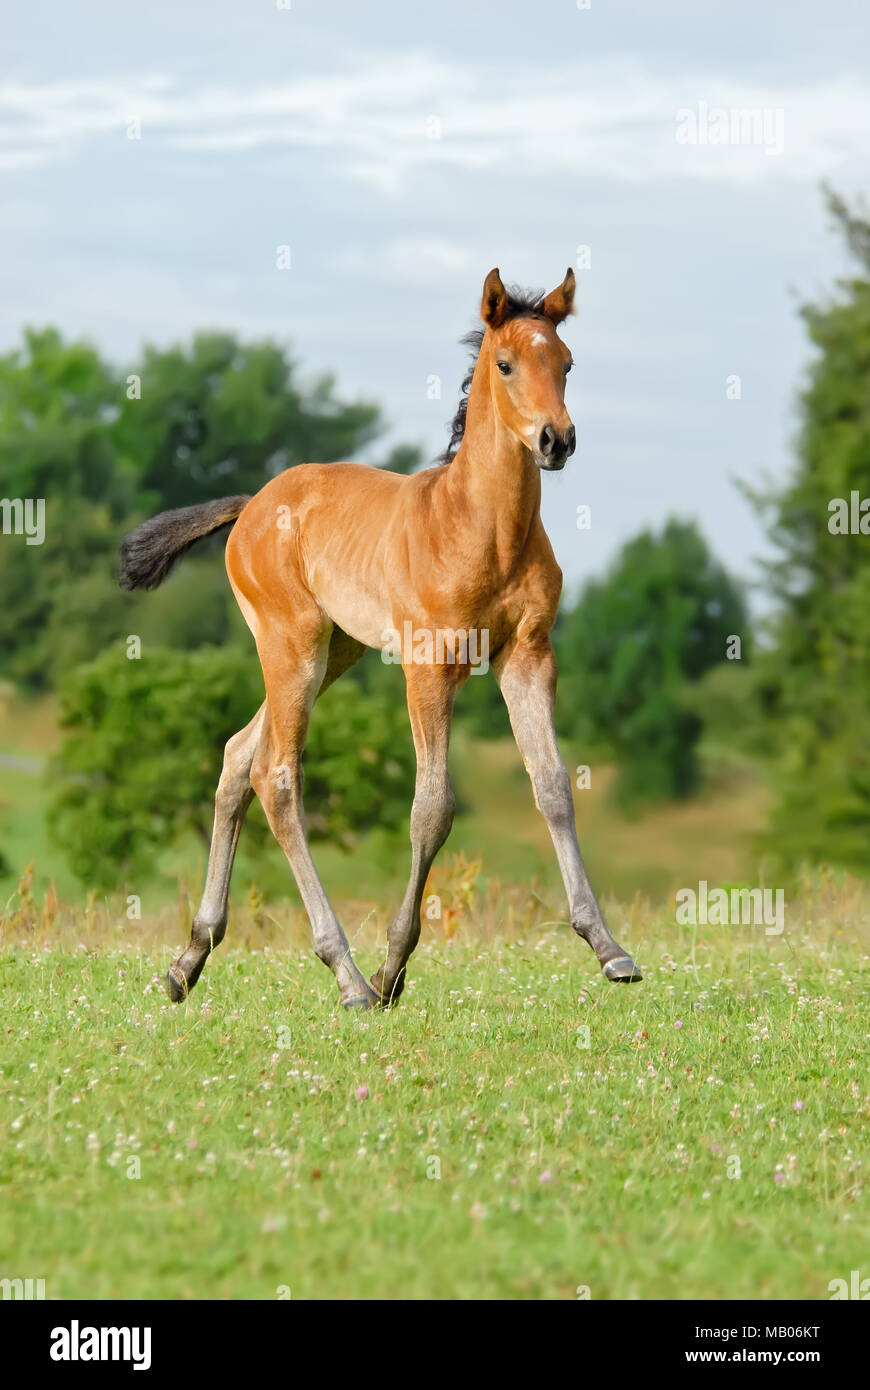 A cute young bay colored Trakehner colt foal, a light warmblood breed of horse, 6 weeks old, goes at a trot in a green grass field, Germany Stock Photo